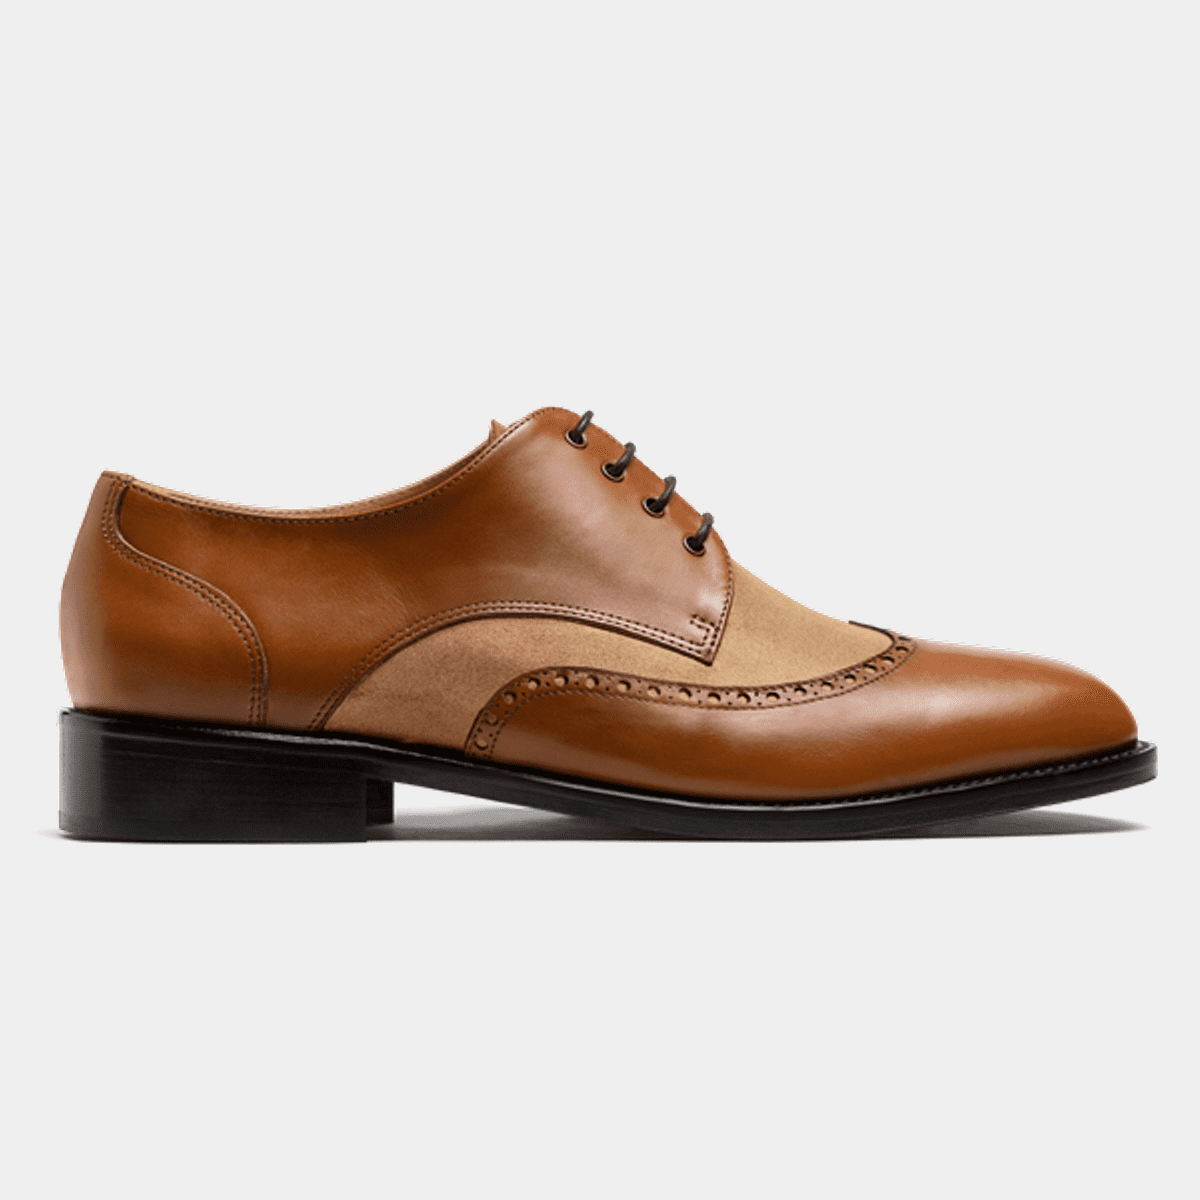 Quarter Brogue shoes - brown leather & suede